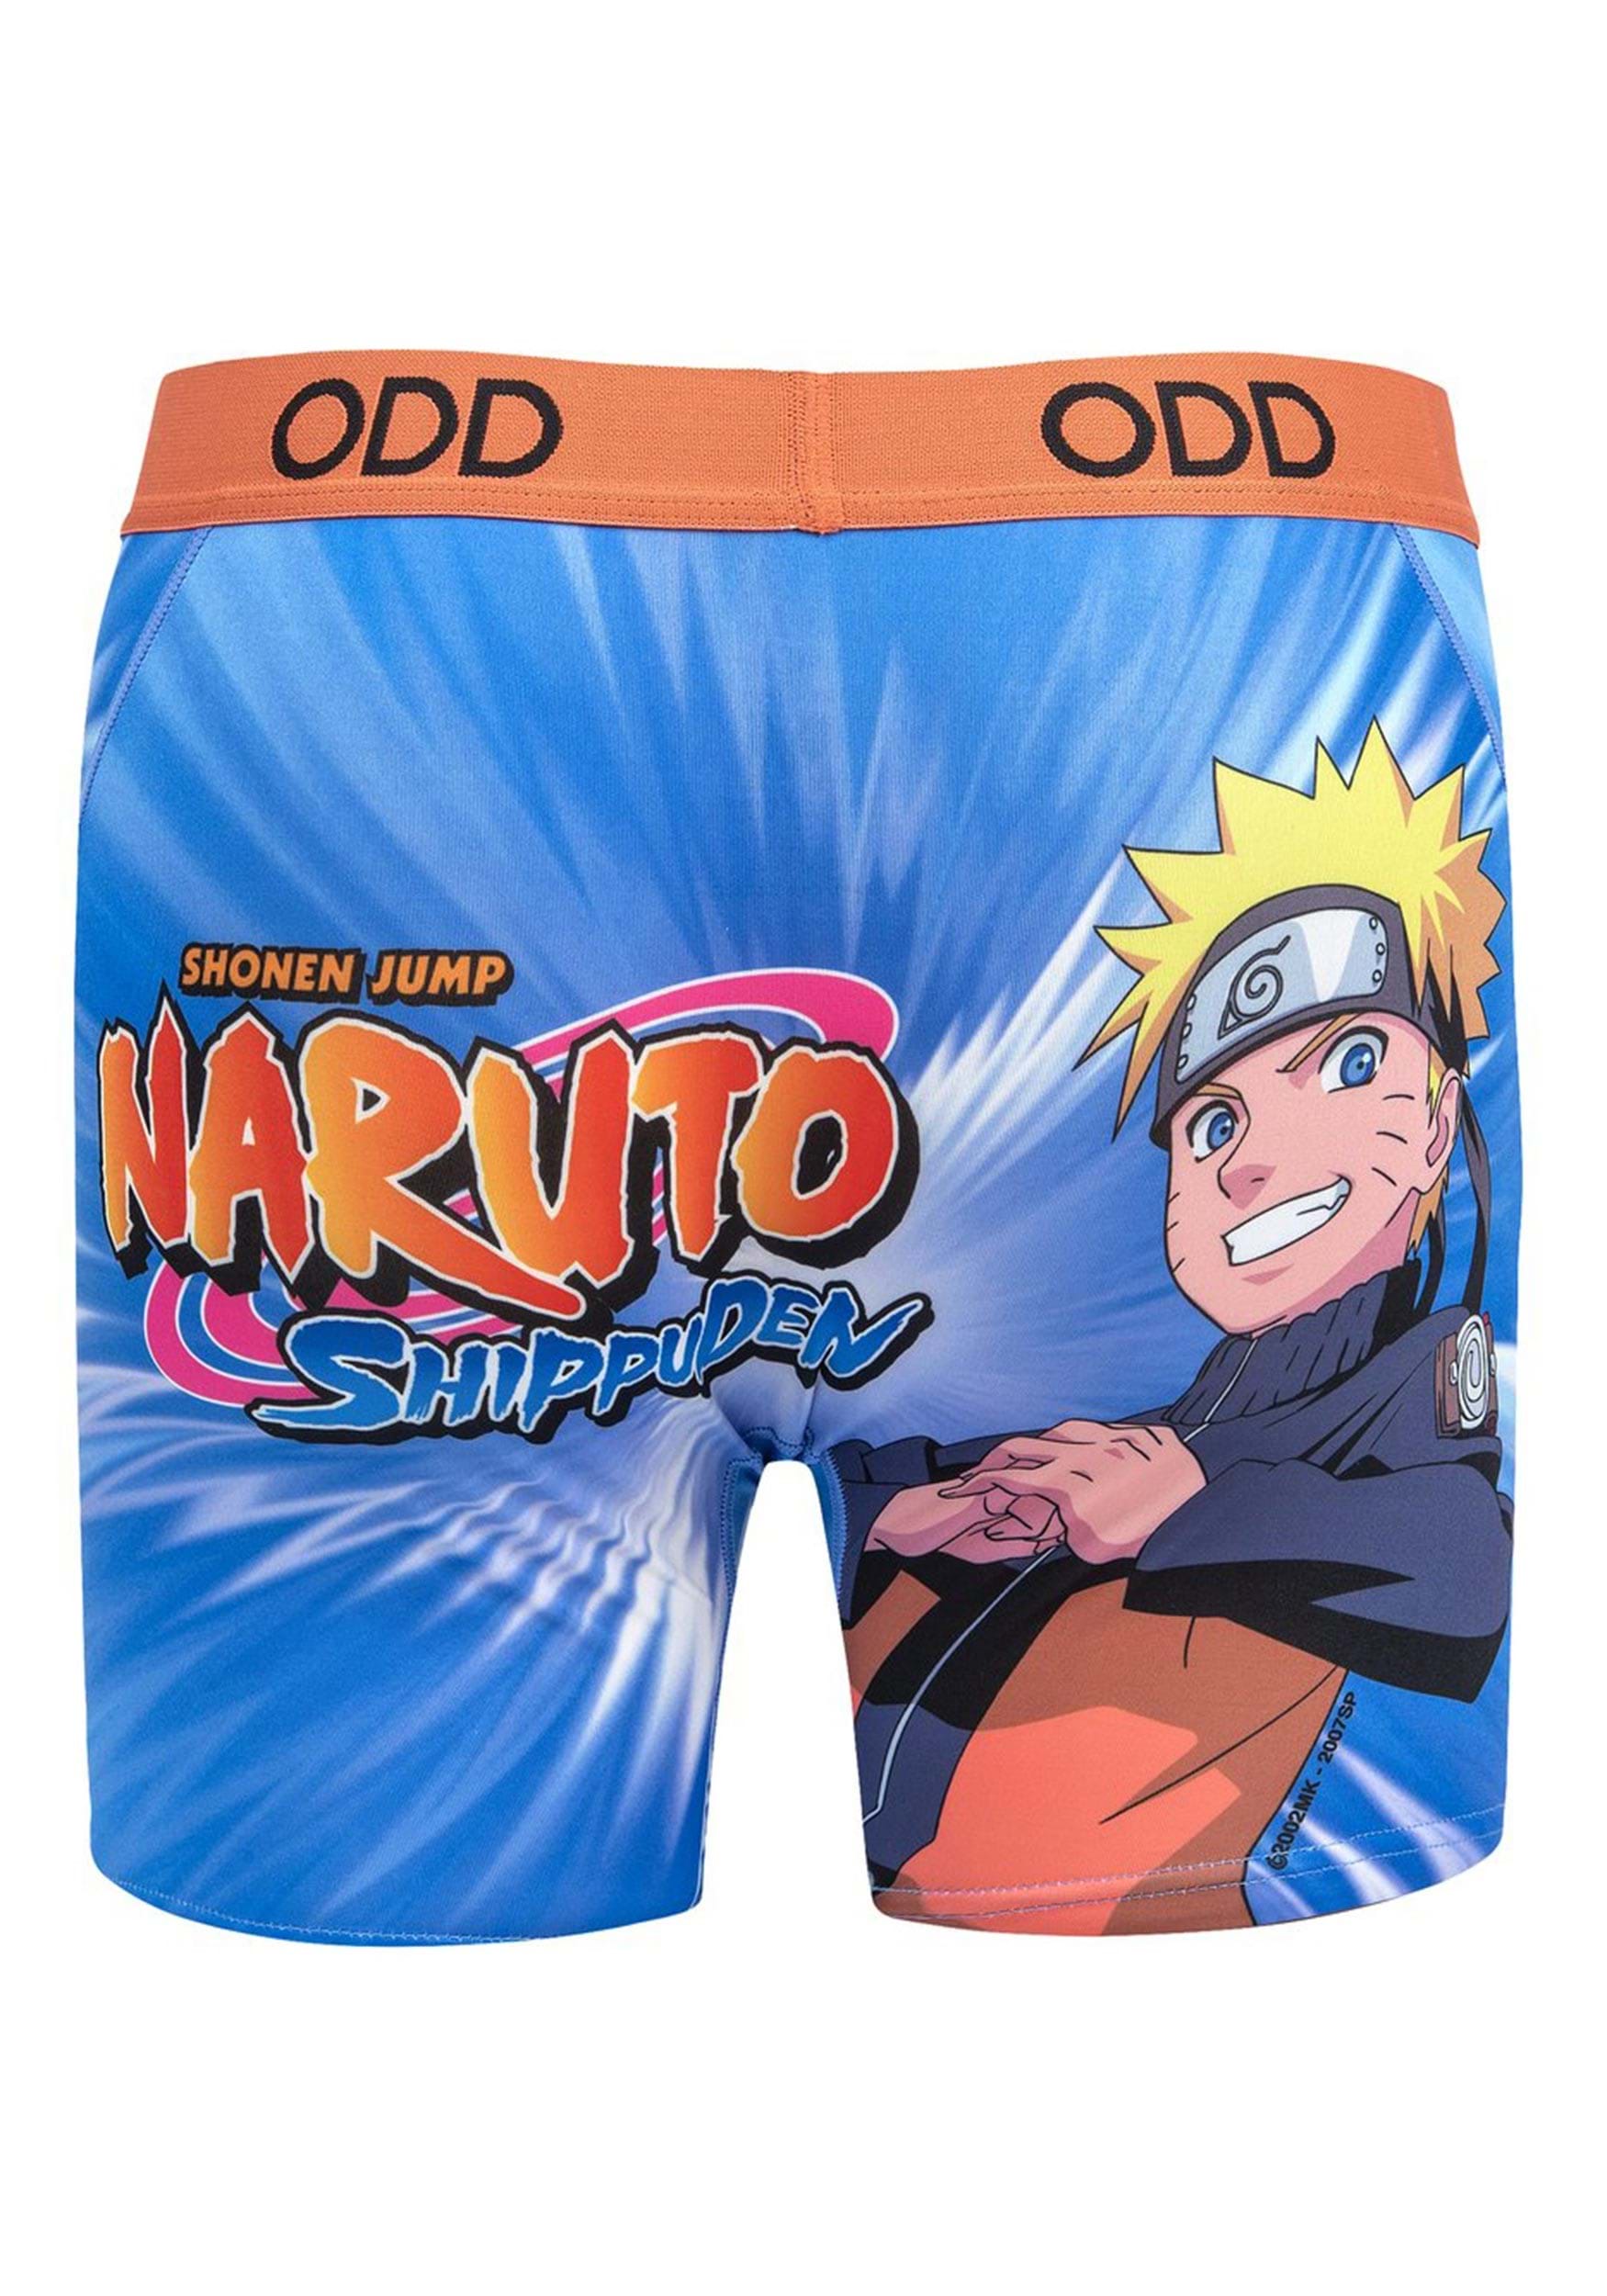 NWT Mens Naruto Boxer Briefs Underwear Guy Adult 2X 2XL OFFICIALLY LICENSED  NEW